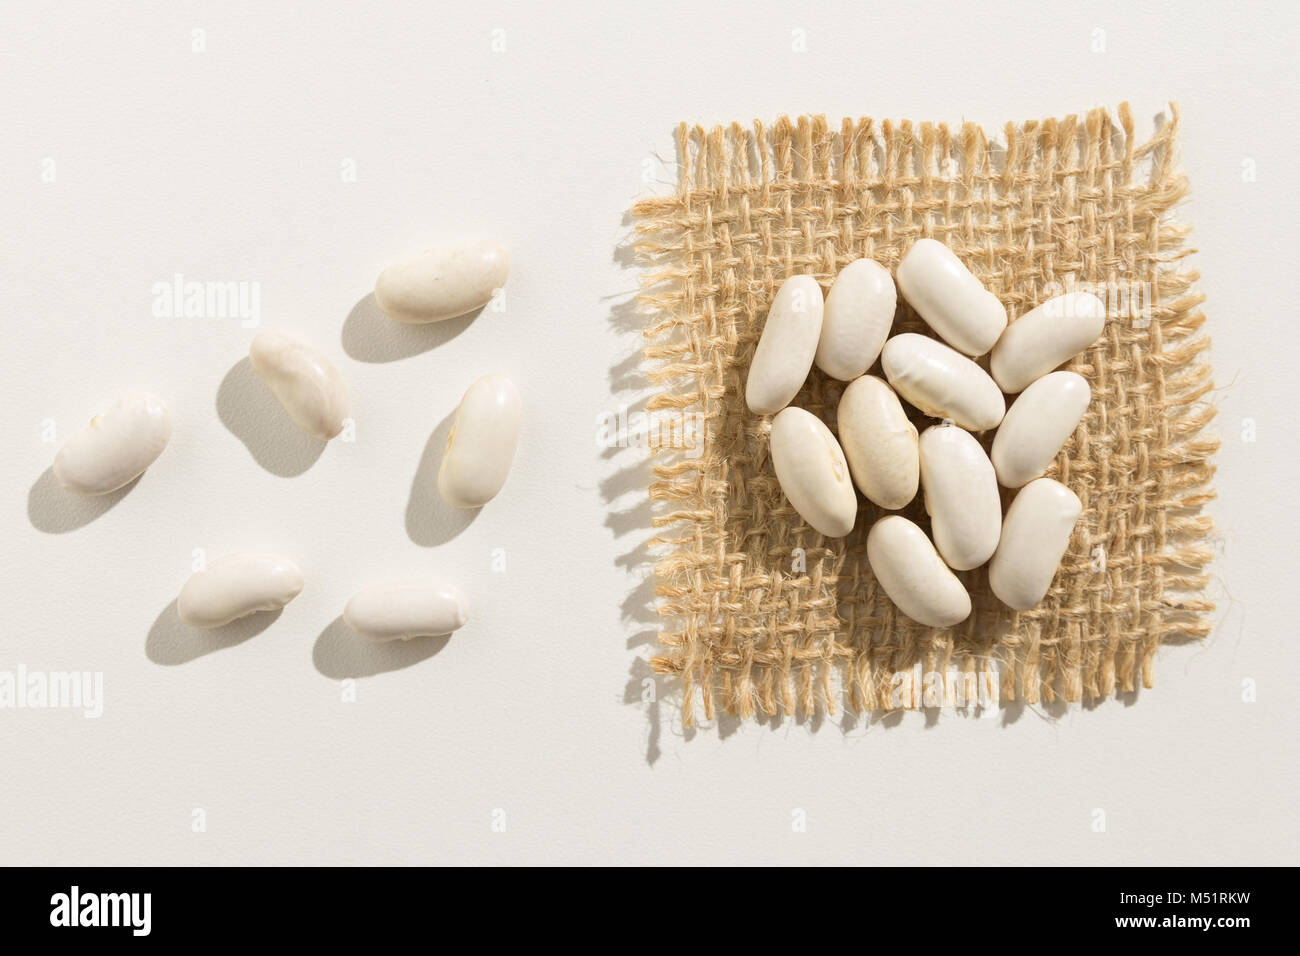 Phaseolus vulgaris is scientific name of Navy Bean legume. Also known as Haricot, Pearl Bean and Feijao Branco. Close up of grains spreaded over white Stock Photo